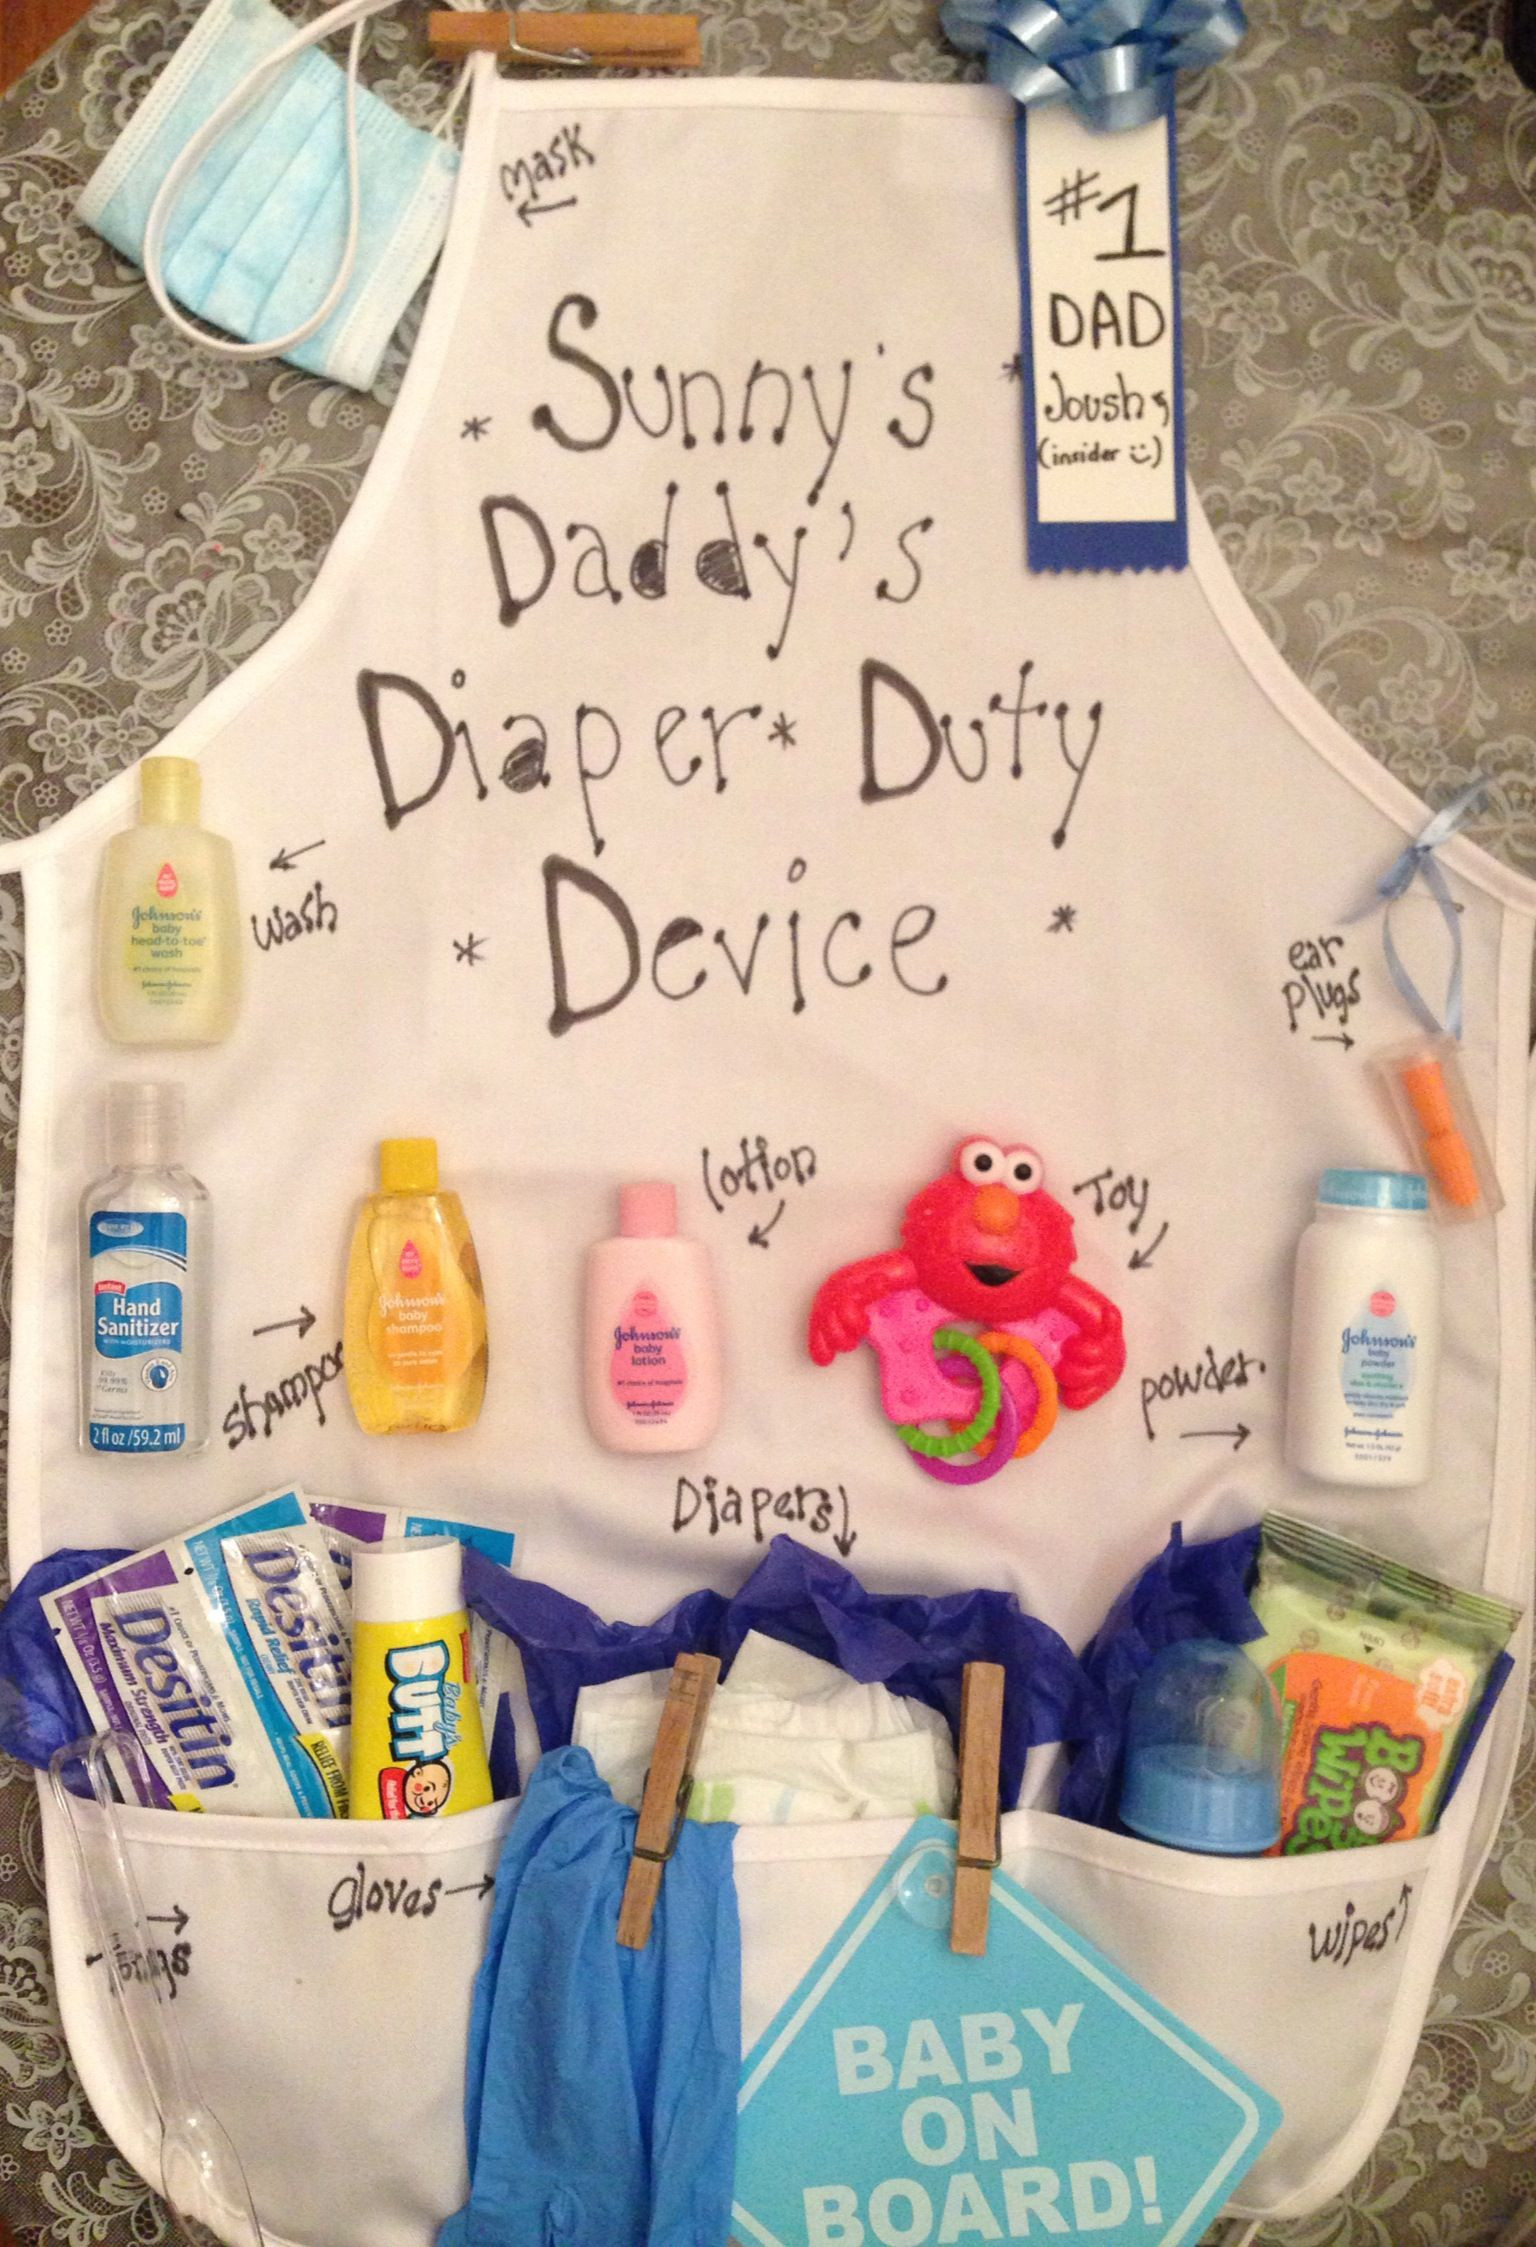 Baby Shower Gift Ideas For Dads
 DIY Daddy s Baby Shower Gift